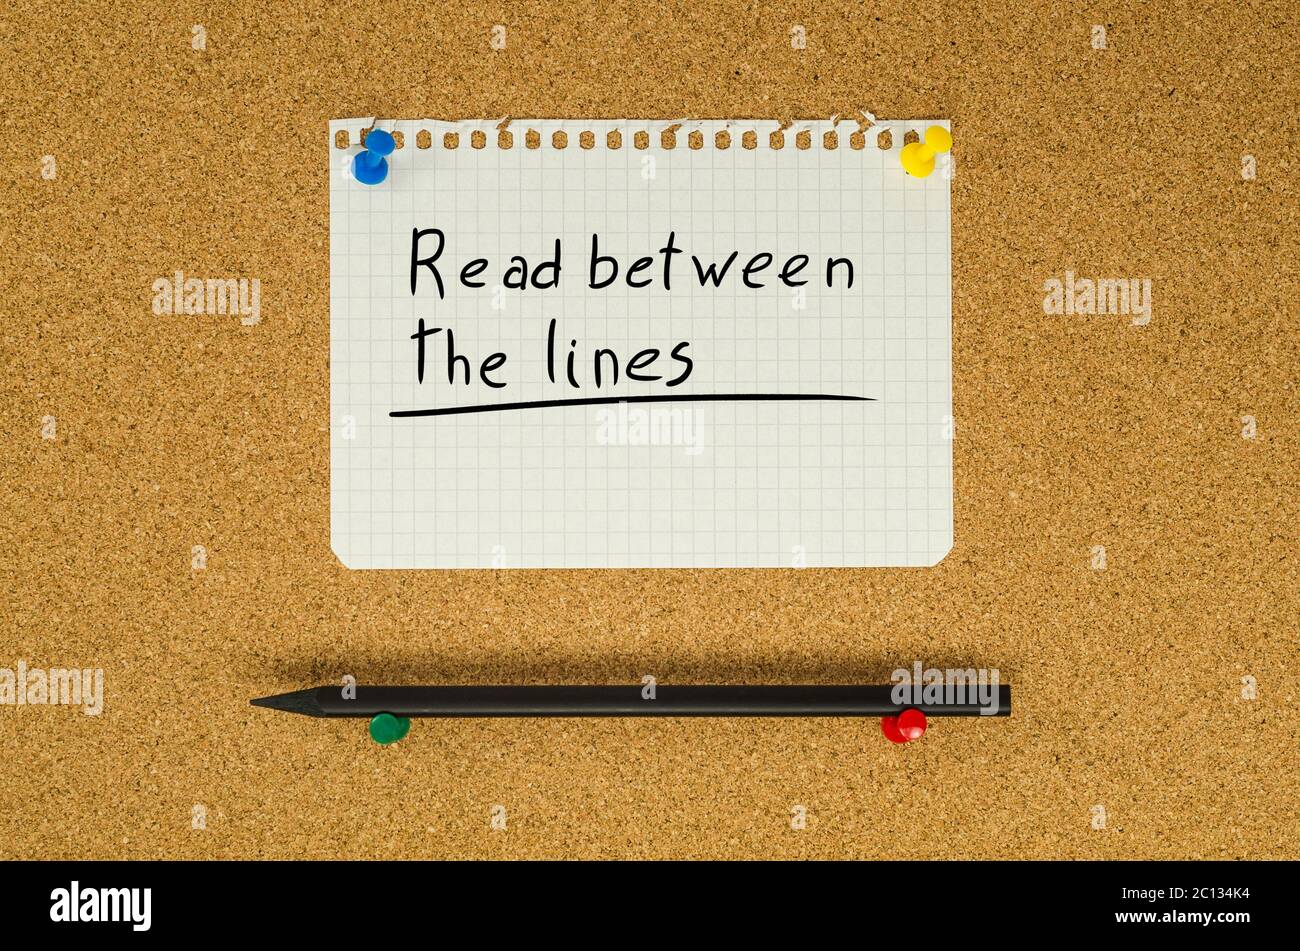 Read between the lines text note message pin on bulletin board Stock Photo